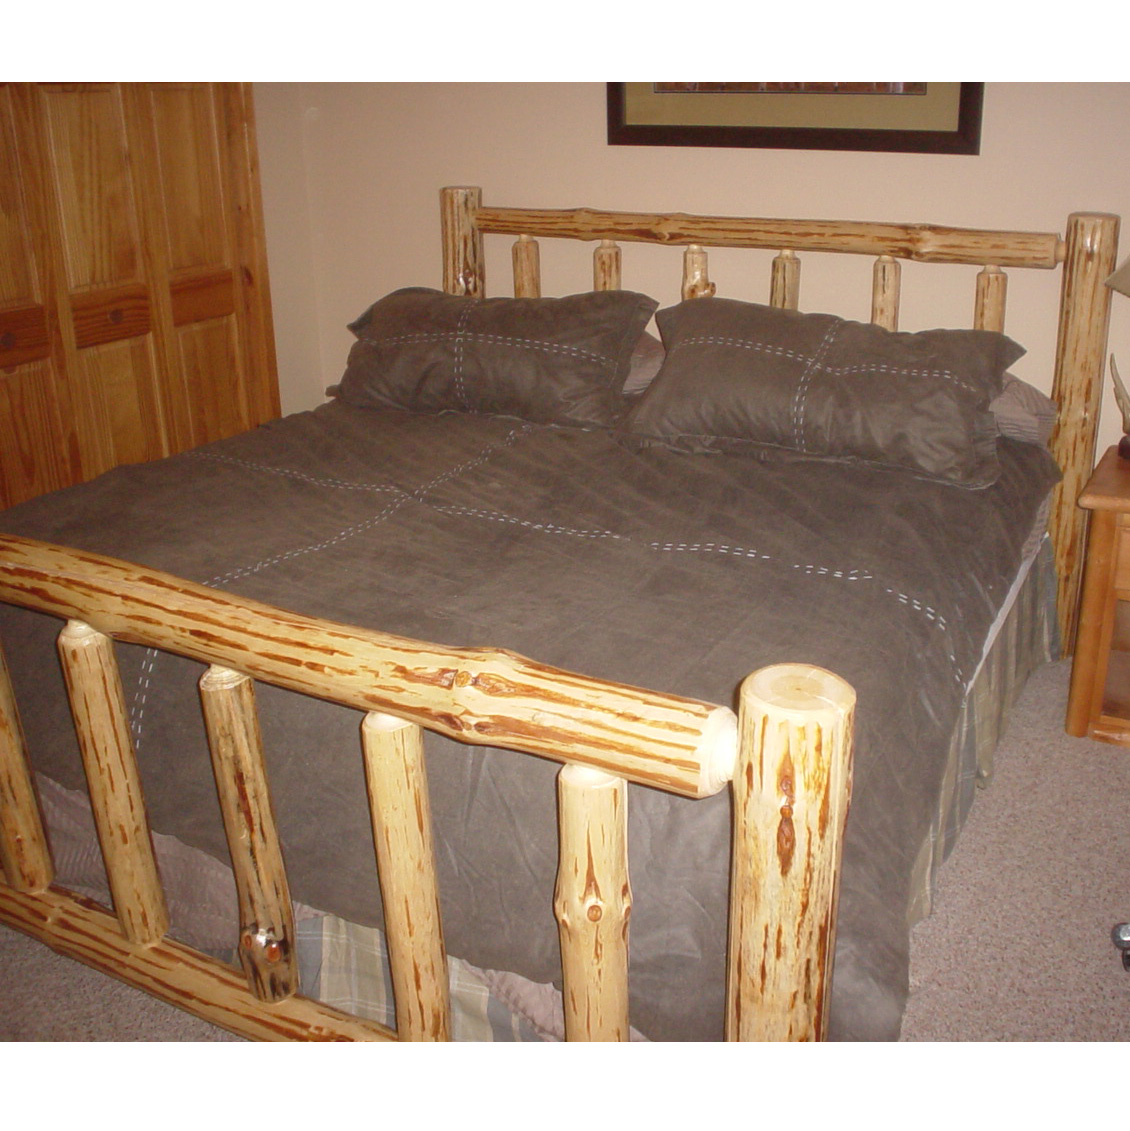 Pine Log Queen Size Bed Frame K A Log Furniture Construction,Sympathy Messages Loss Of A Sister Condolences